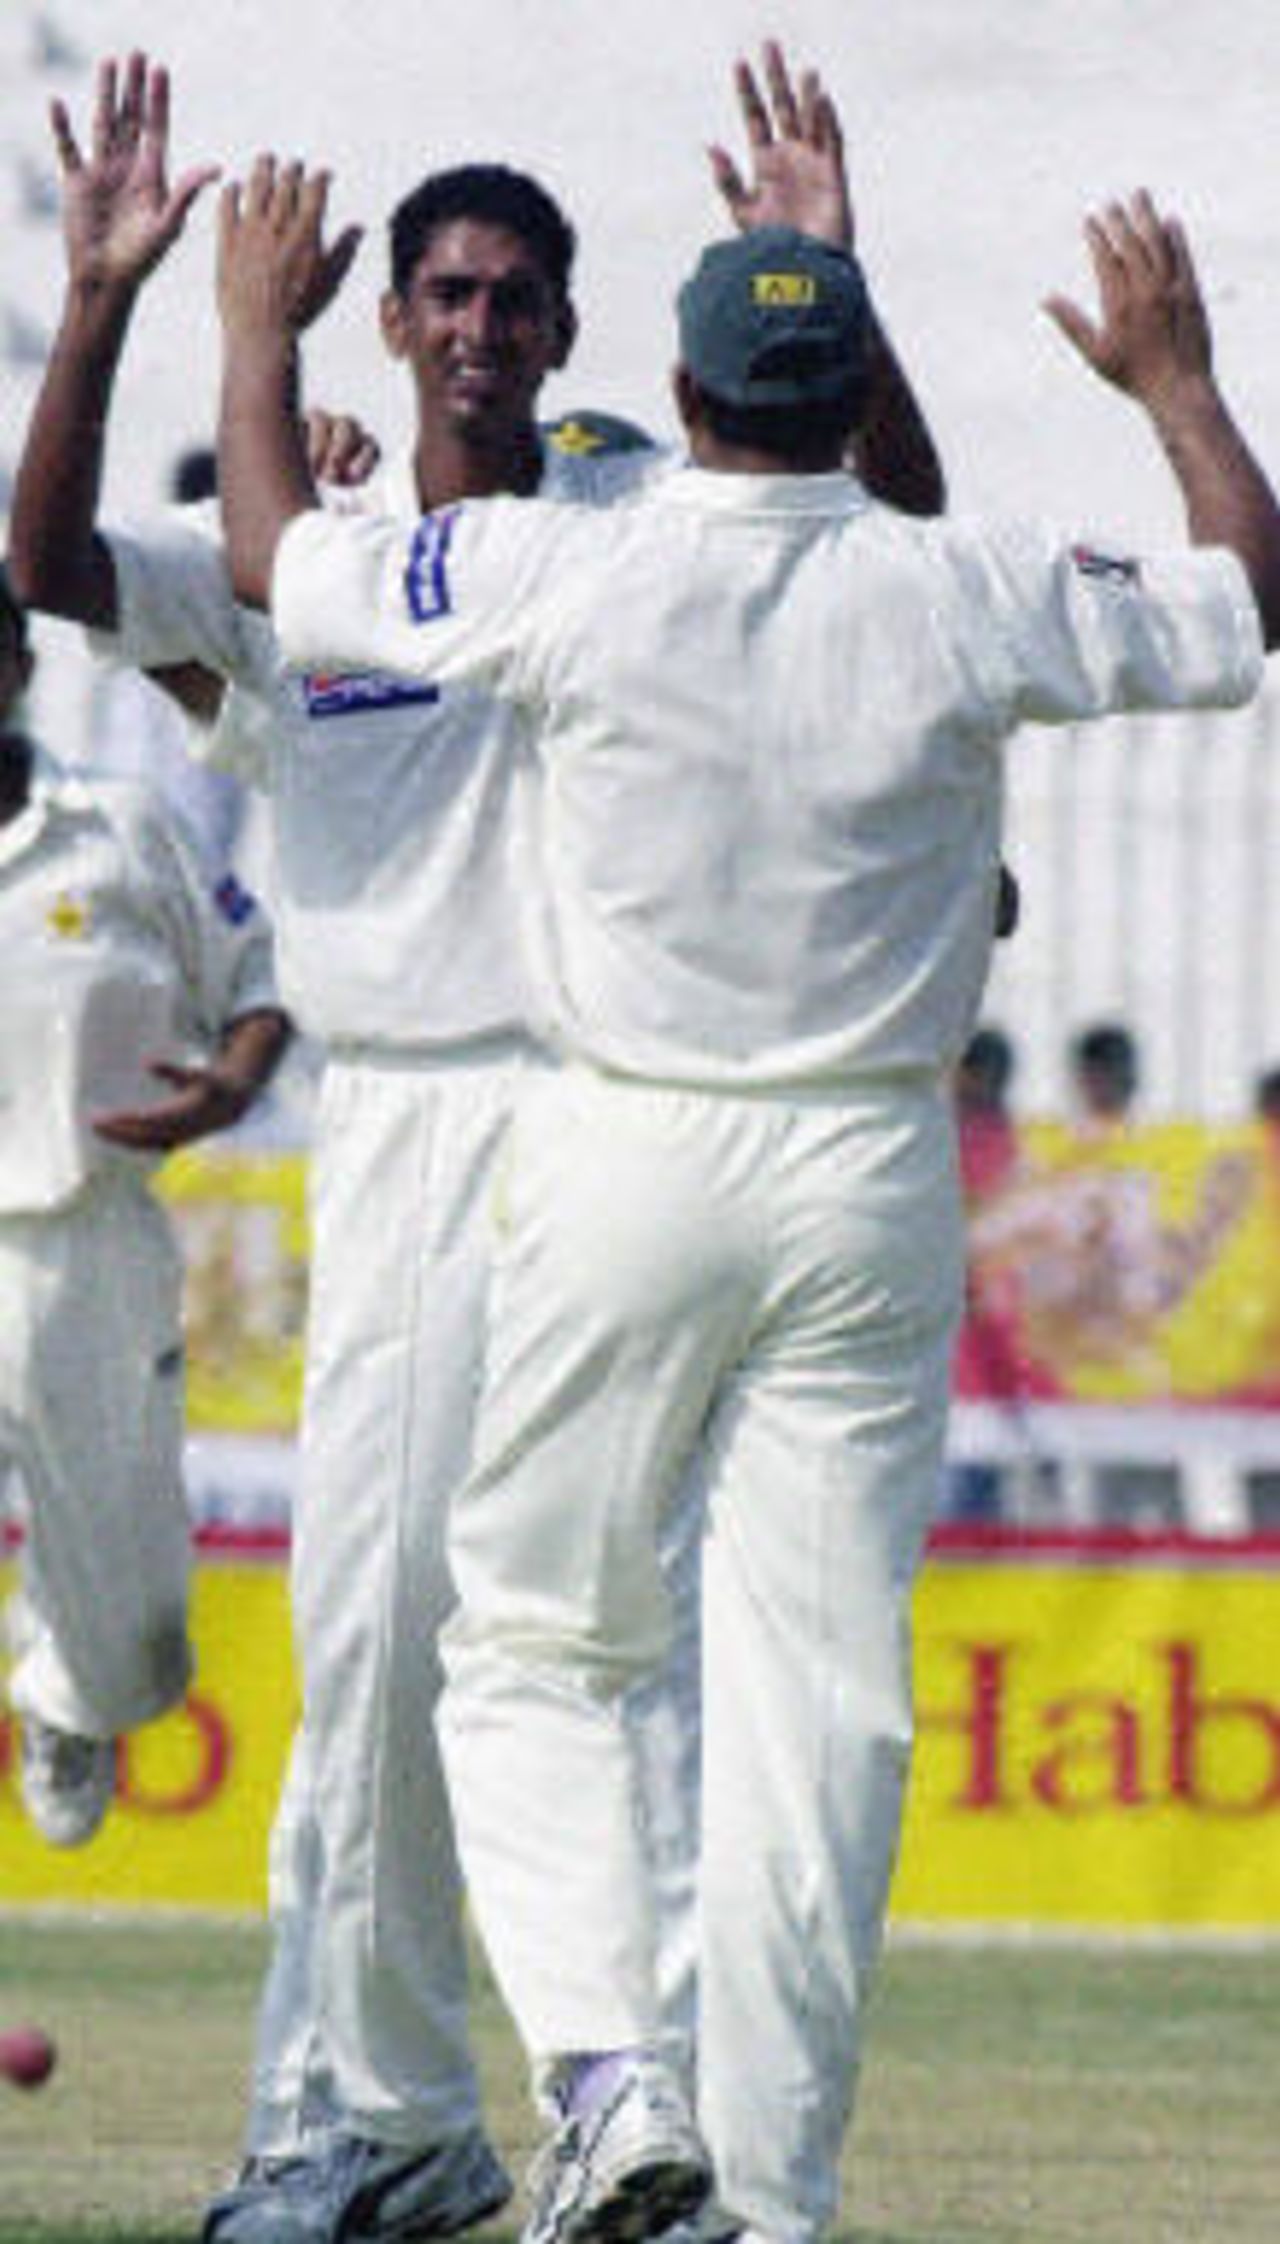 Shabbir Ahmed (L) celebrates Habibul Bashar's wicket with a teammate during the first day of the second Test between Pakistan and Bangladesh in Peshawar, 27 August 2003.